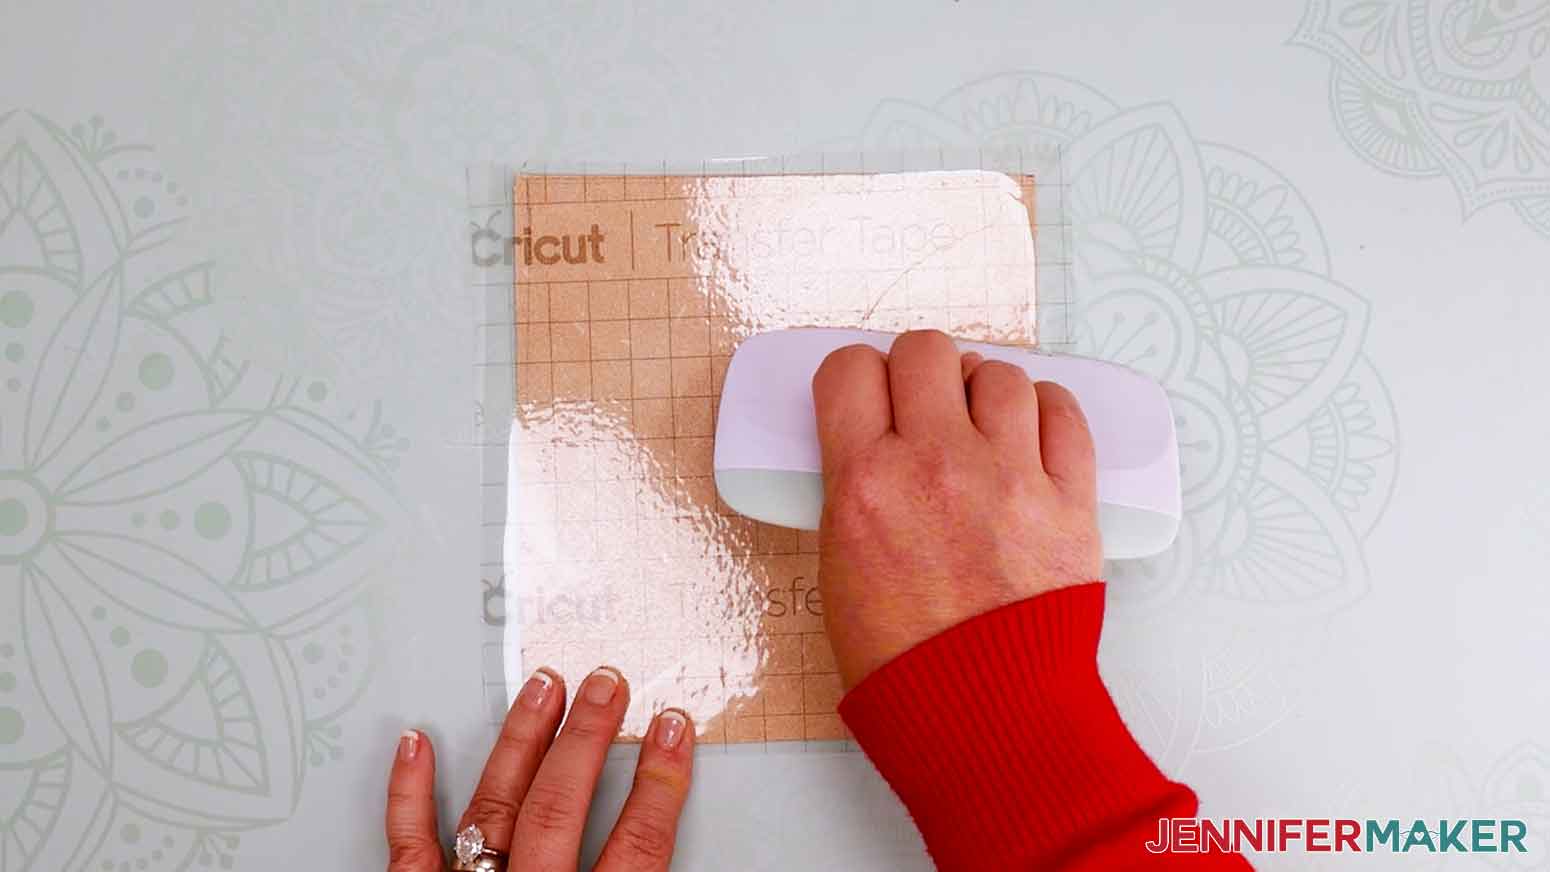 Use a scraper tool to adhere transfer tape to the back side of the leather.